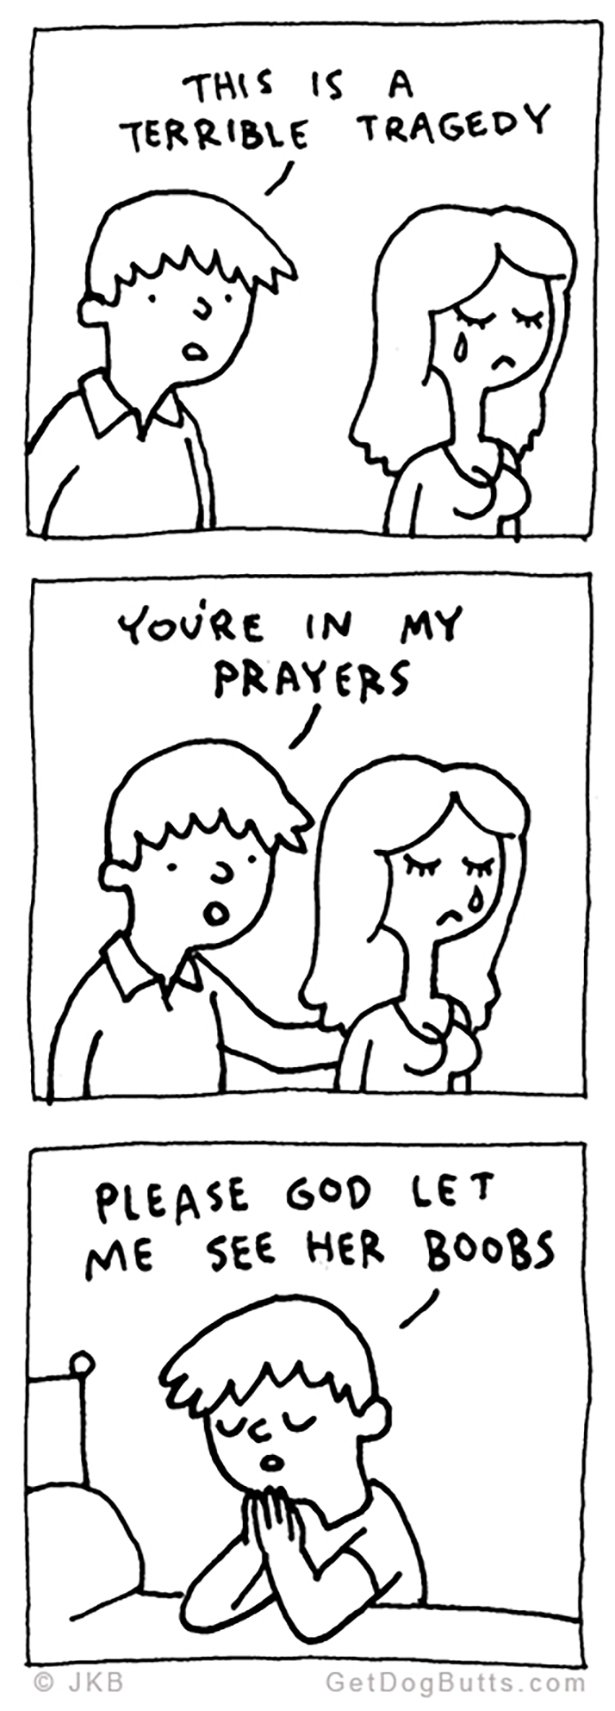 cartoon - This Is A Terrible Tragedy You'Re In My Prayers Please God Let Me See Her Boobs Jkb GetDogButts.com